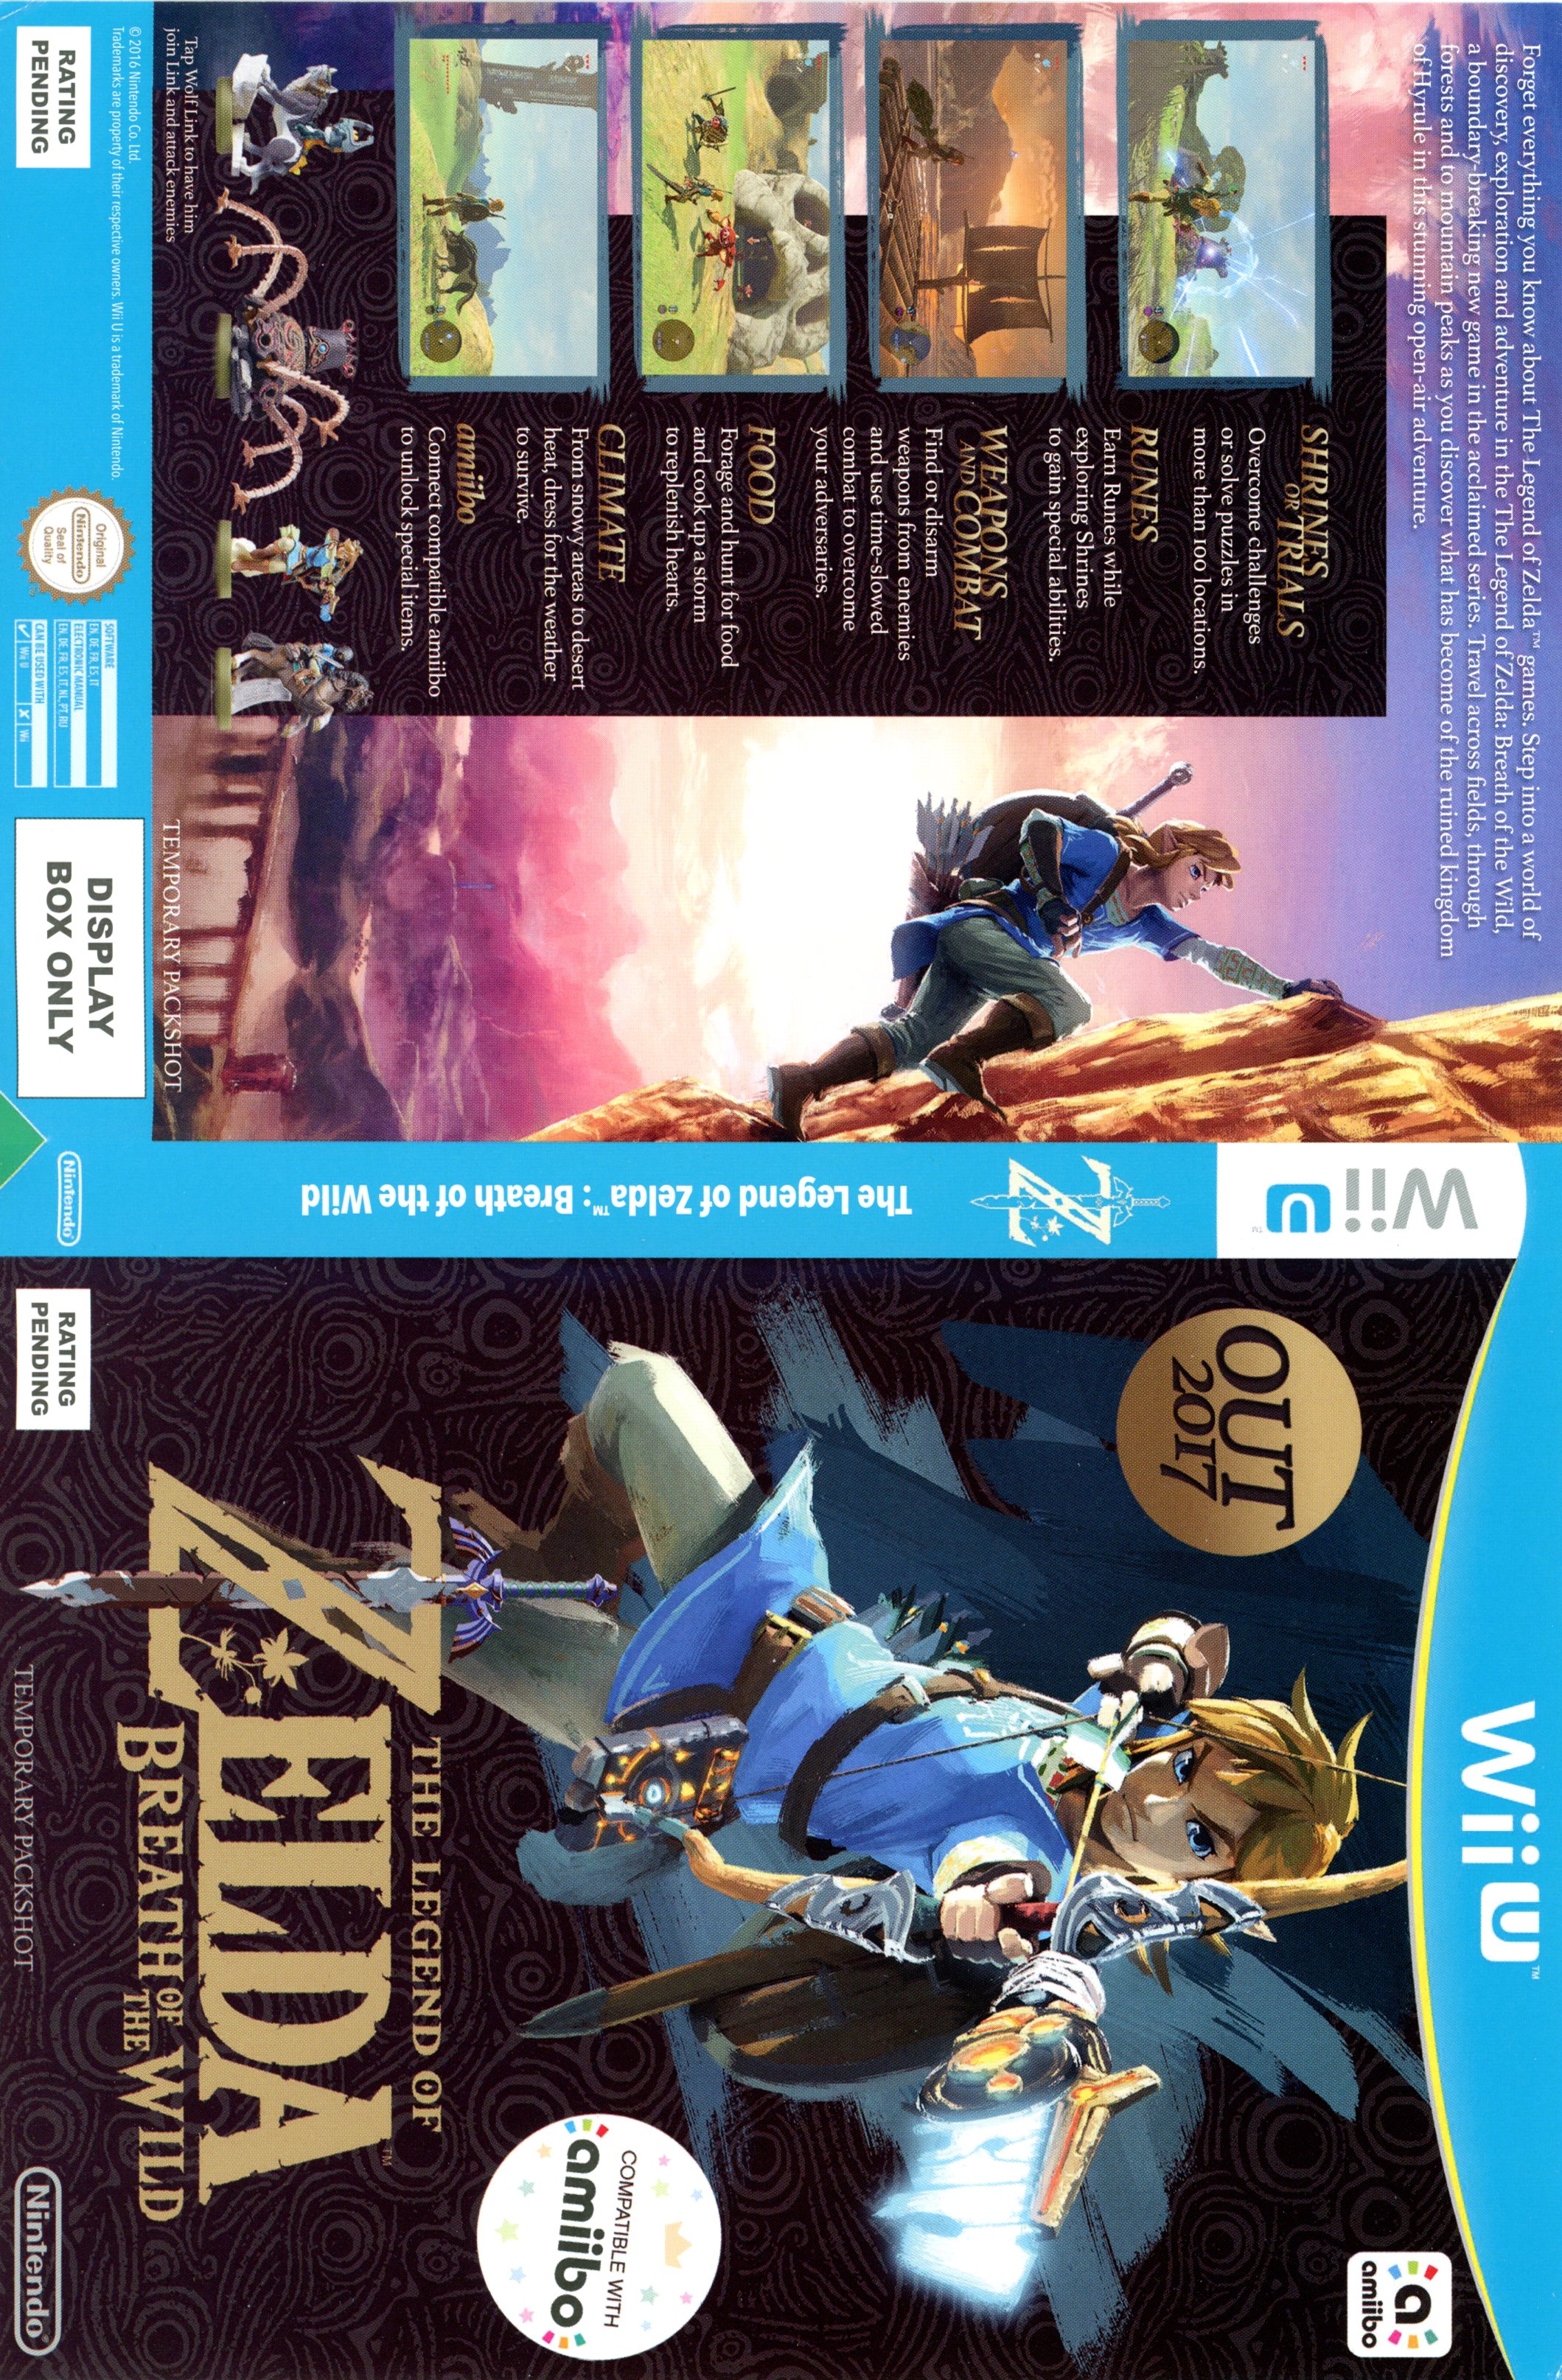 Legend Of Zelda Breath Of The Wild Nintendo Wii U Display Only Box Art :  Nintendo : Free Download, Borrow, and Streaming : Internet Archive